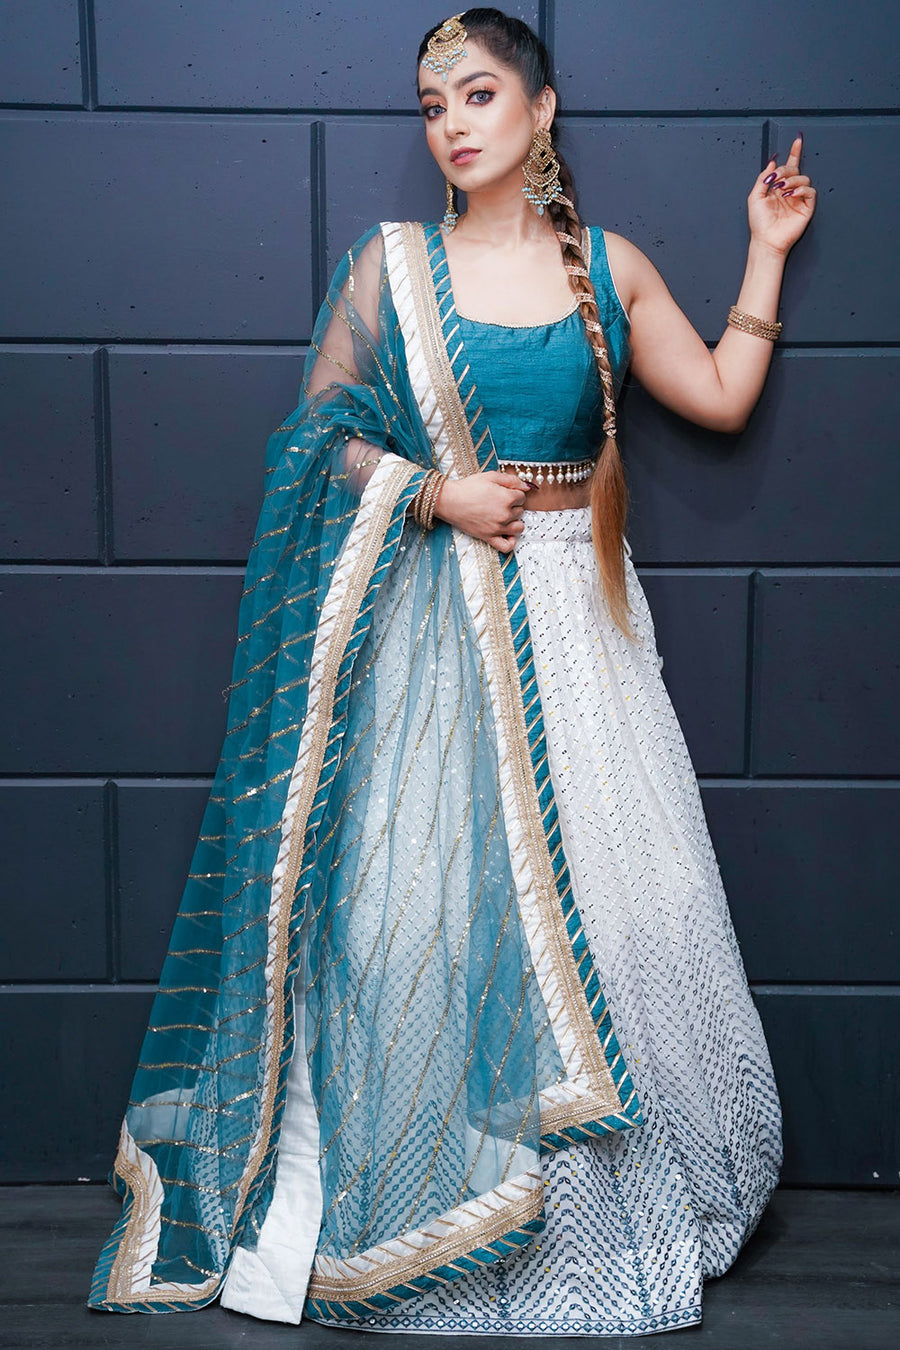 White Colour Chiffon Readymade Lehenga Set having Blue Colour Floral Print  in Round Shaped Blouse with Skirt and Shawl